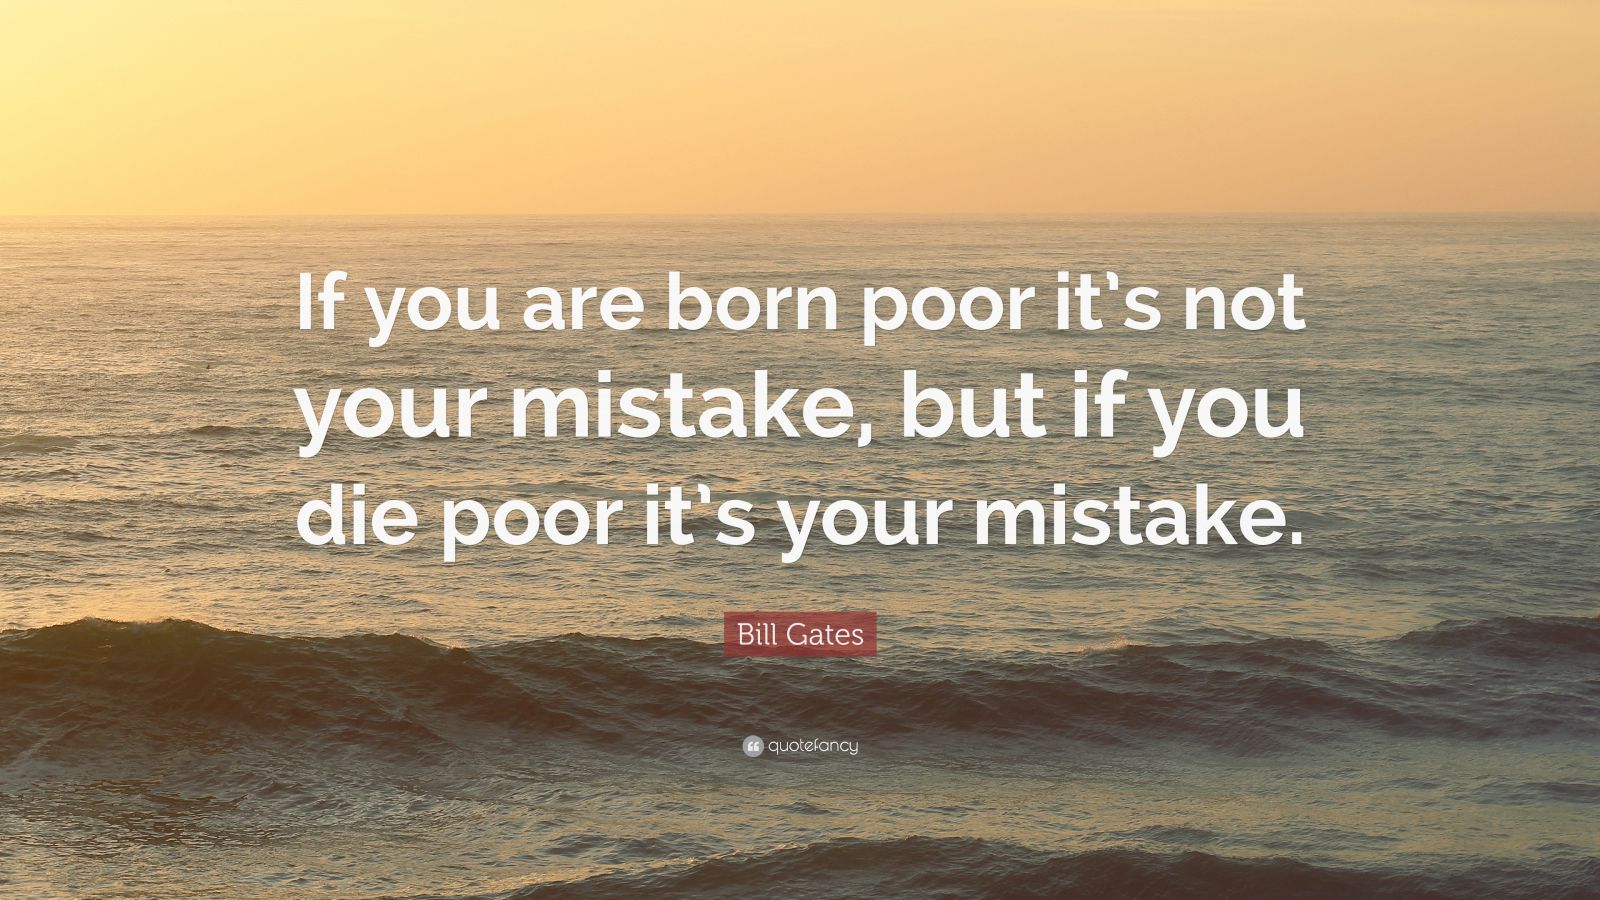 Bill Gates Quote “If you are born poor its not your